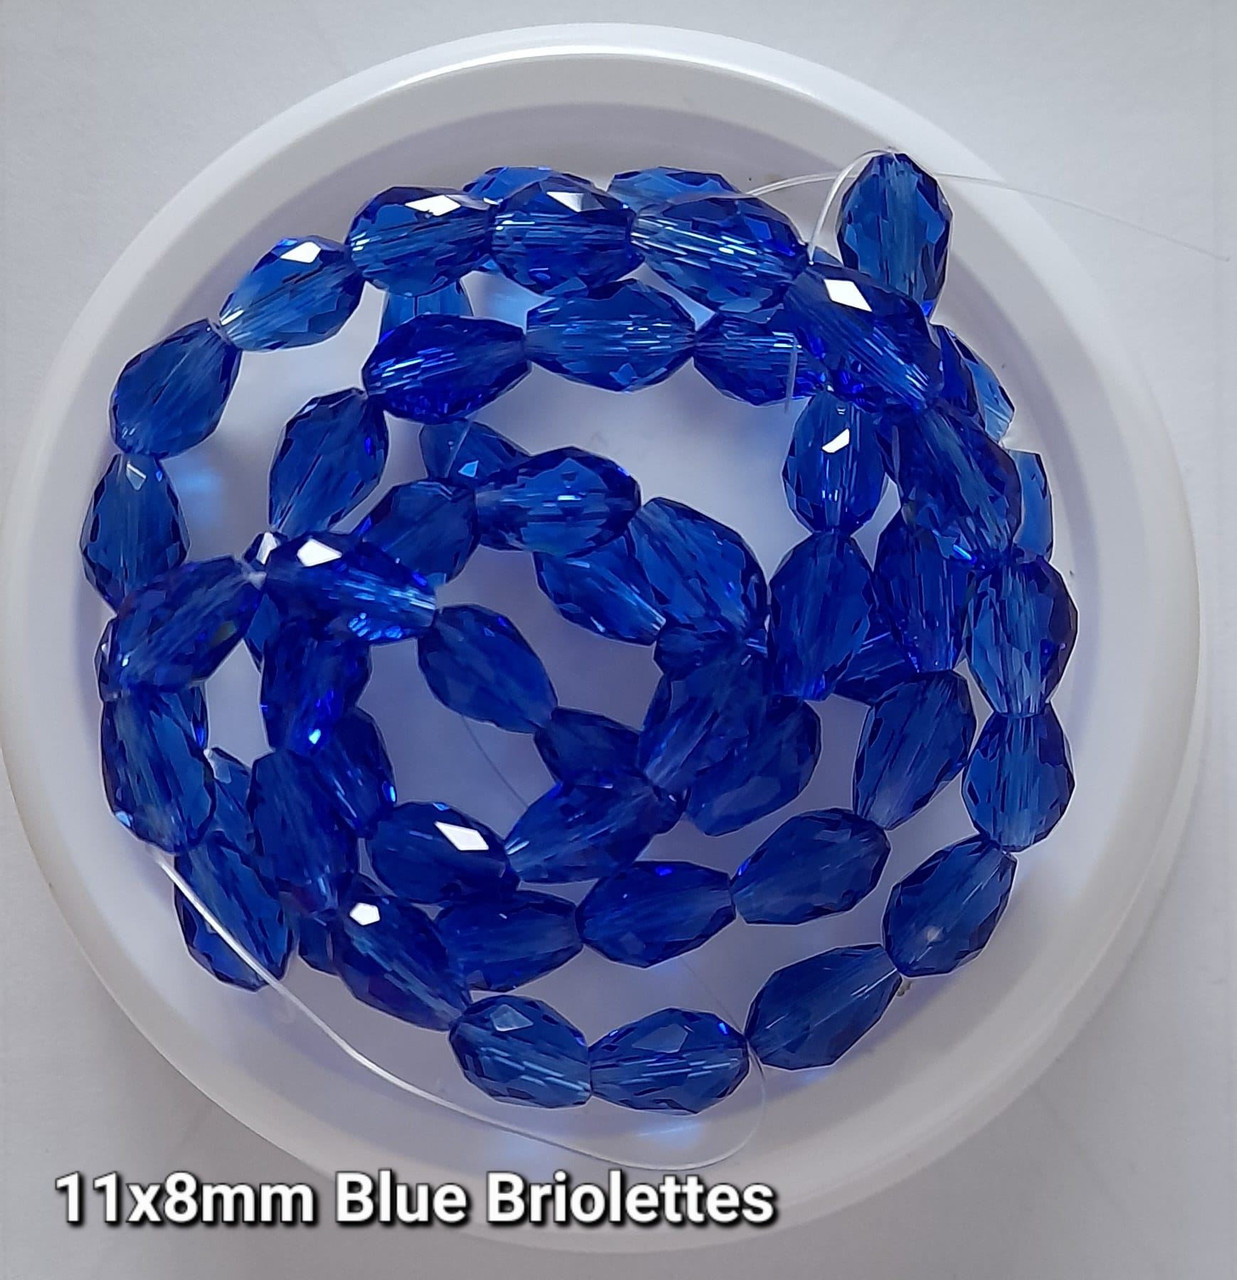 Strand of faceted glass drop beads (briolettes) - approx 11x8mm, Blue, approx 60 beads